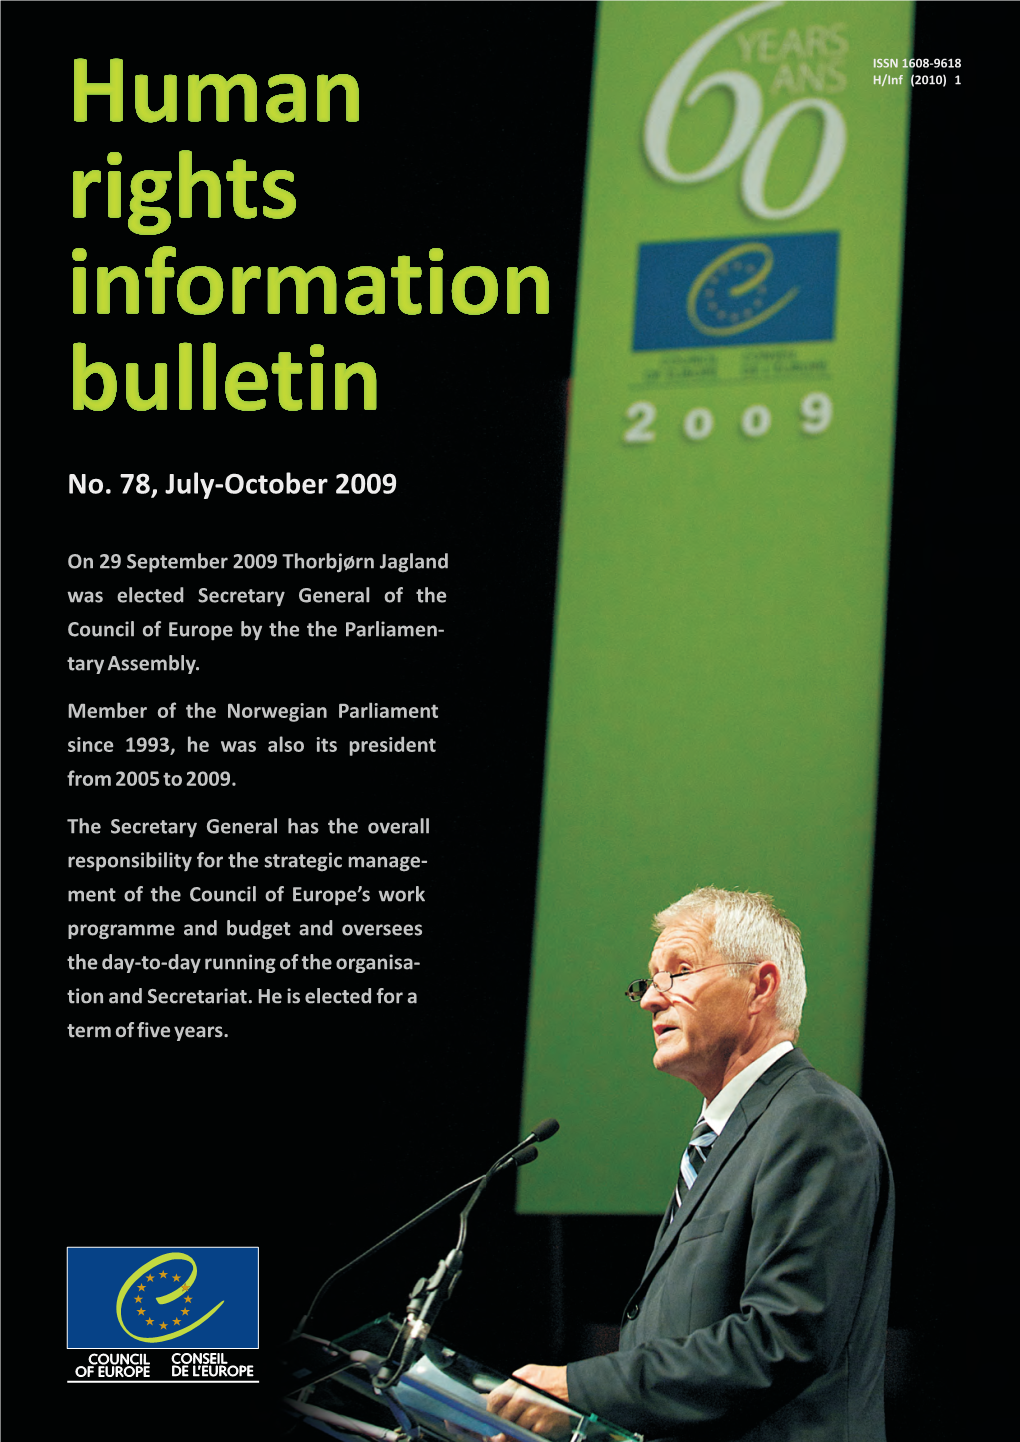 Human Rights Information Bulletin, No. 78 Council of Europe